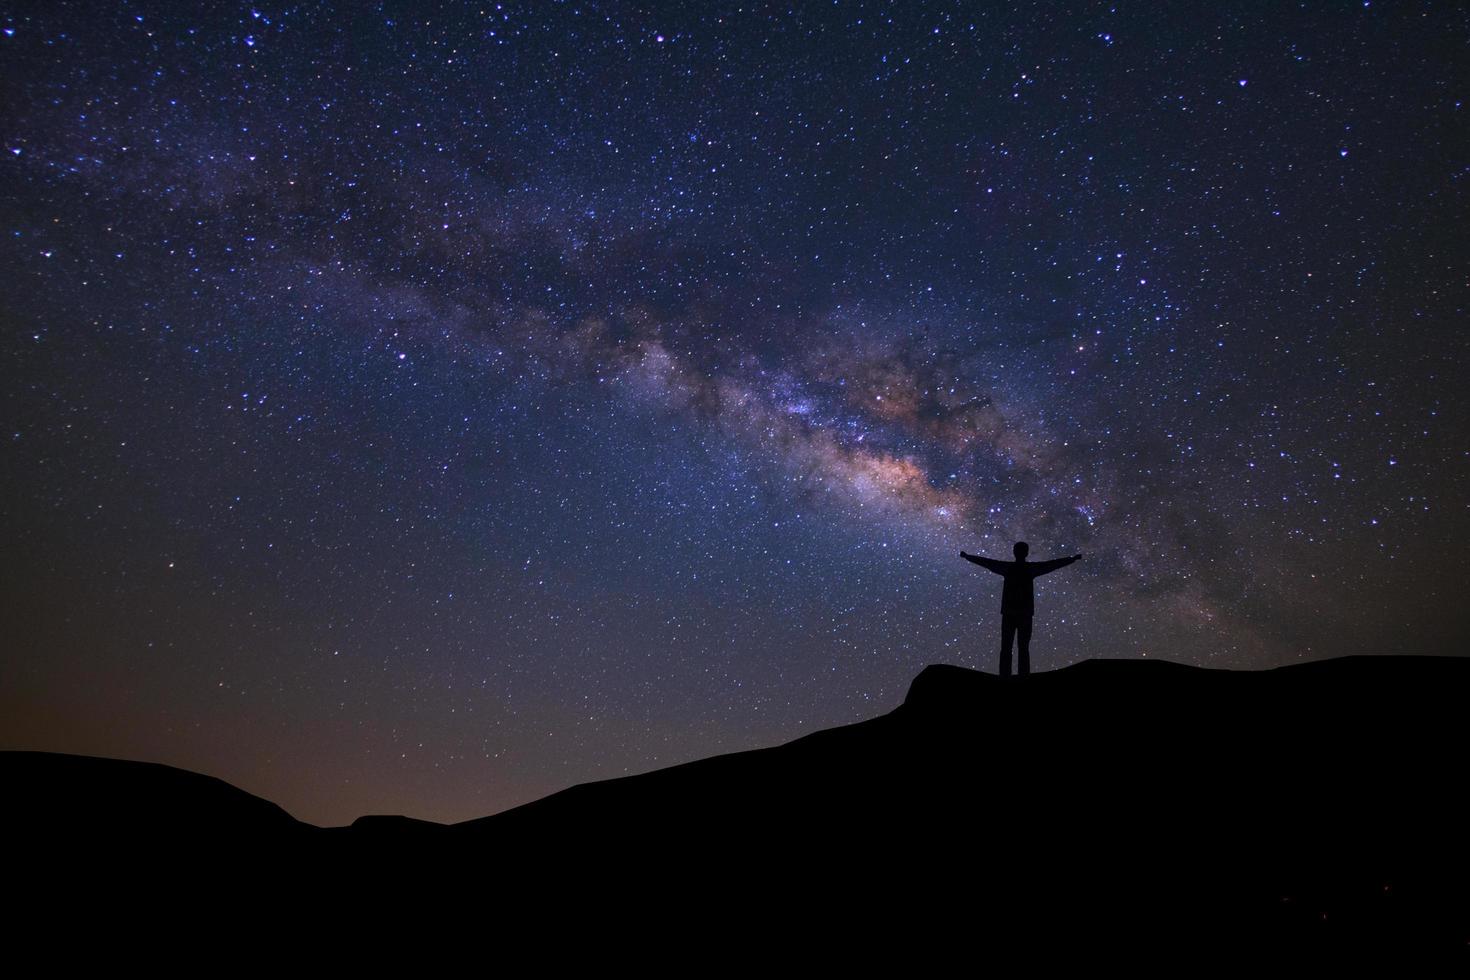 Landscape with milky way, Night sky with stars and silhouette of happy people standing on the mountain, Long exposure photograph, with grain photo